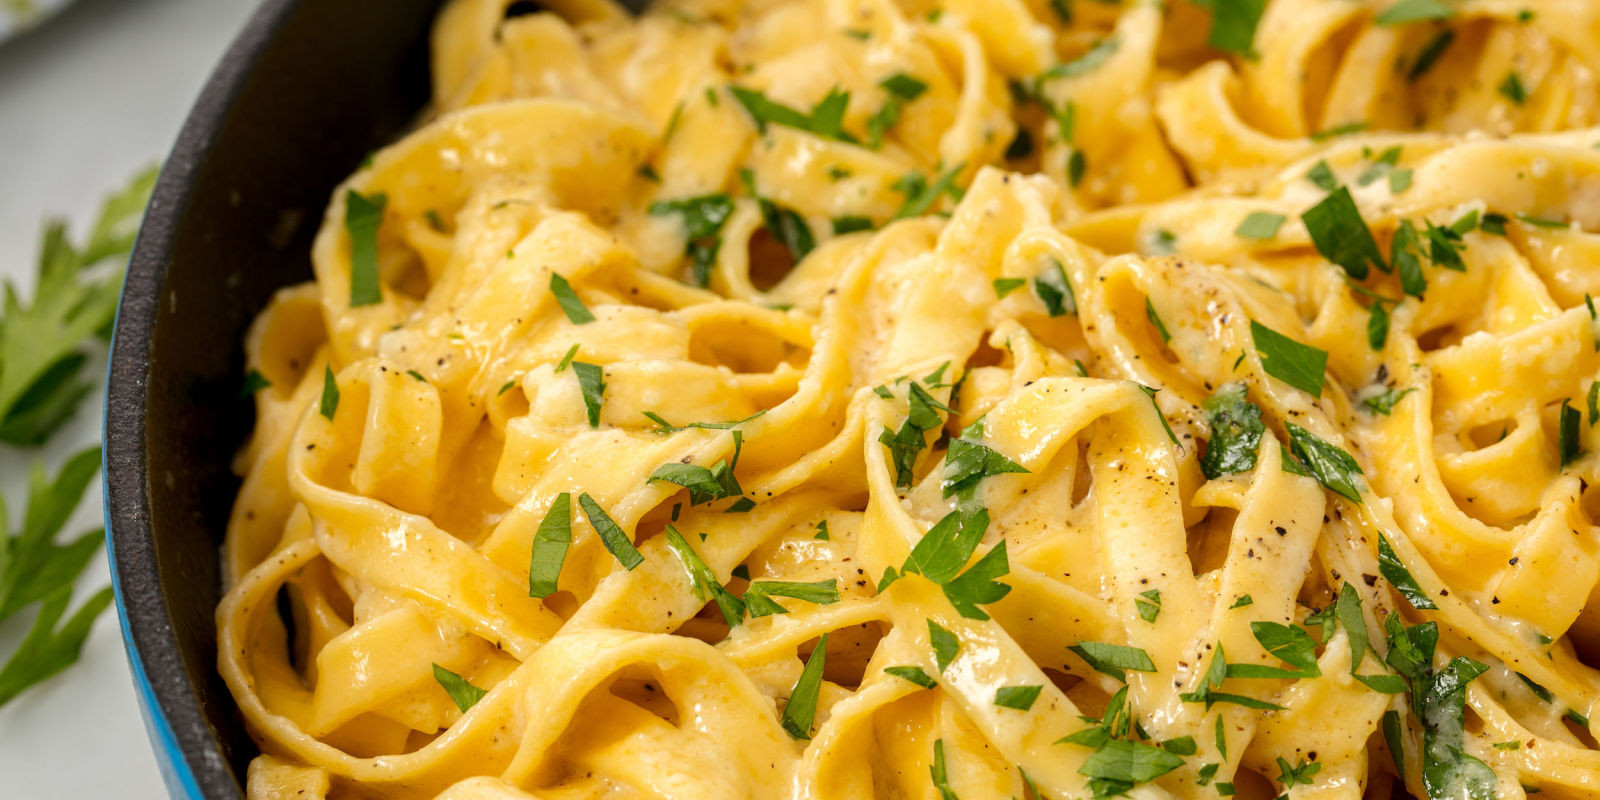 35 Best Easy Pasta Dinner Recipes - Best Recipes Ideas and Collections